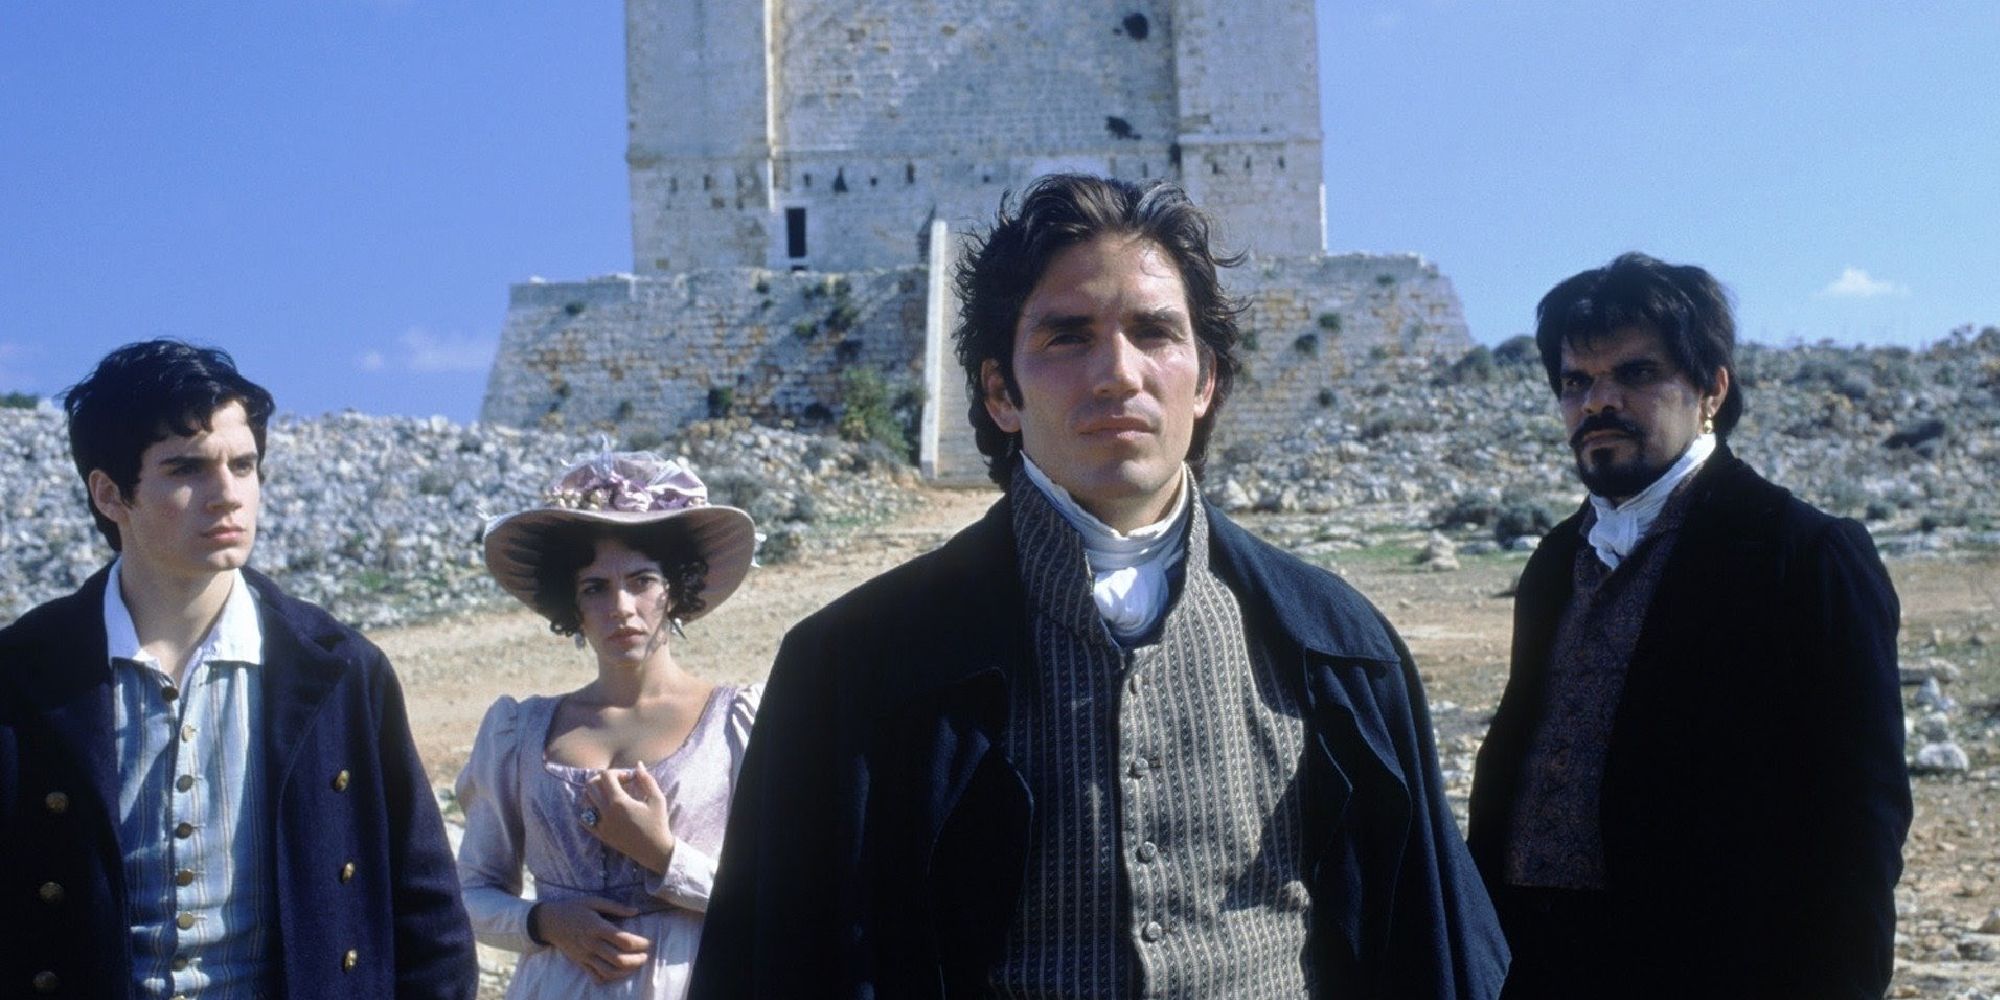 The cast of The Count of Monte Cristo